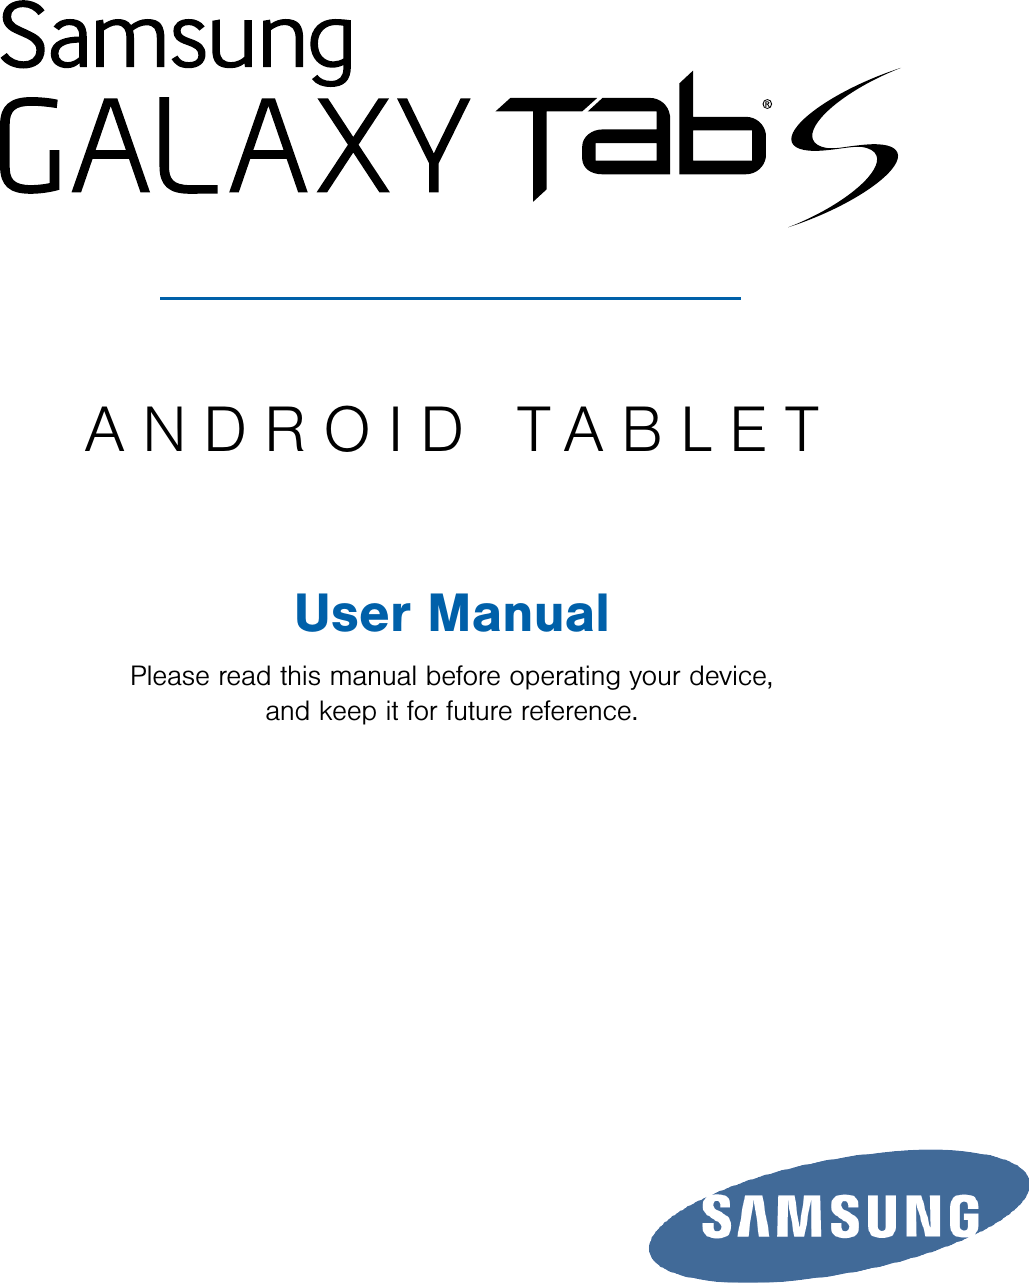 ANDROID TABLETUser ManualPlease read this manual before operating your device, and keep it for future reference.